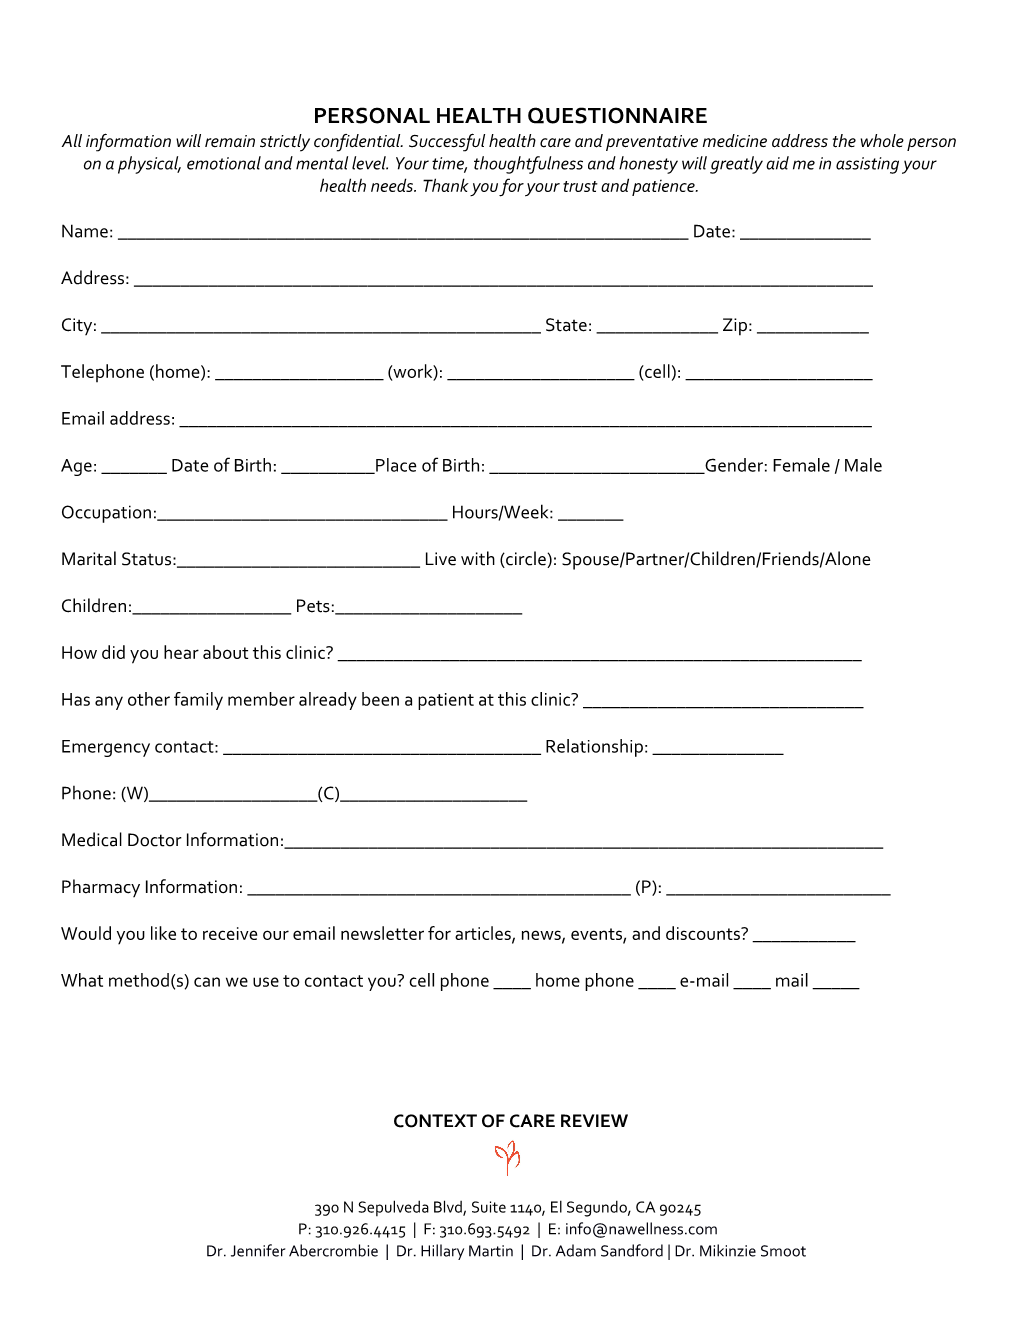 Personal Health Questionnaire